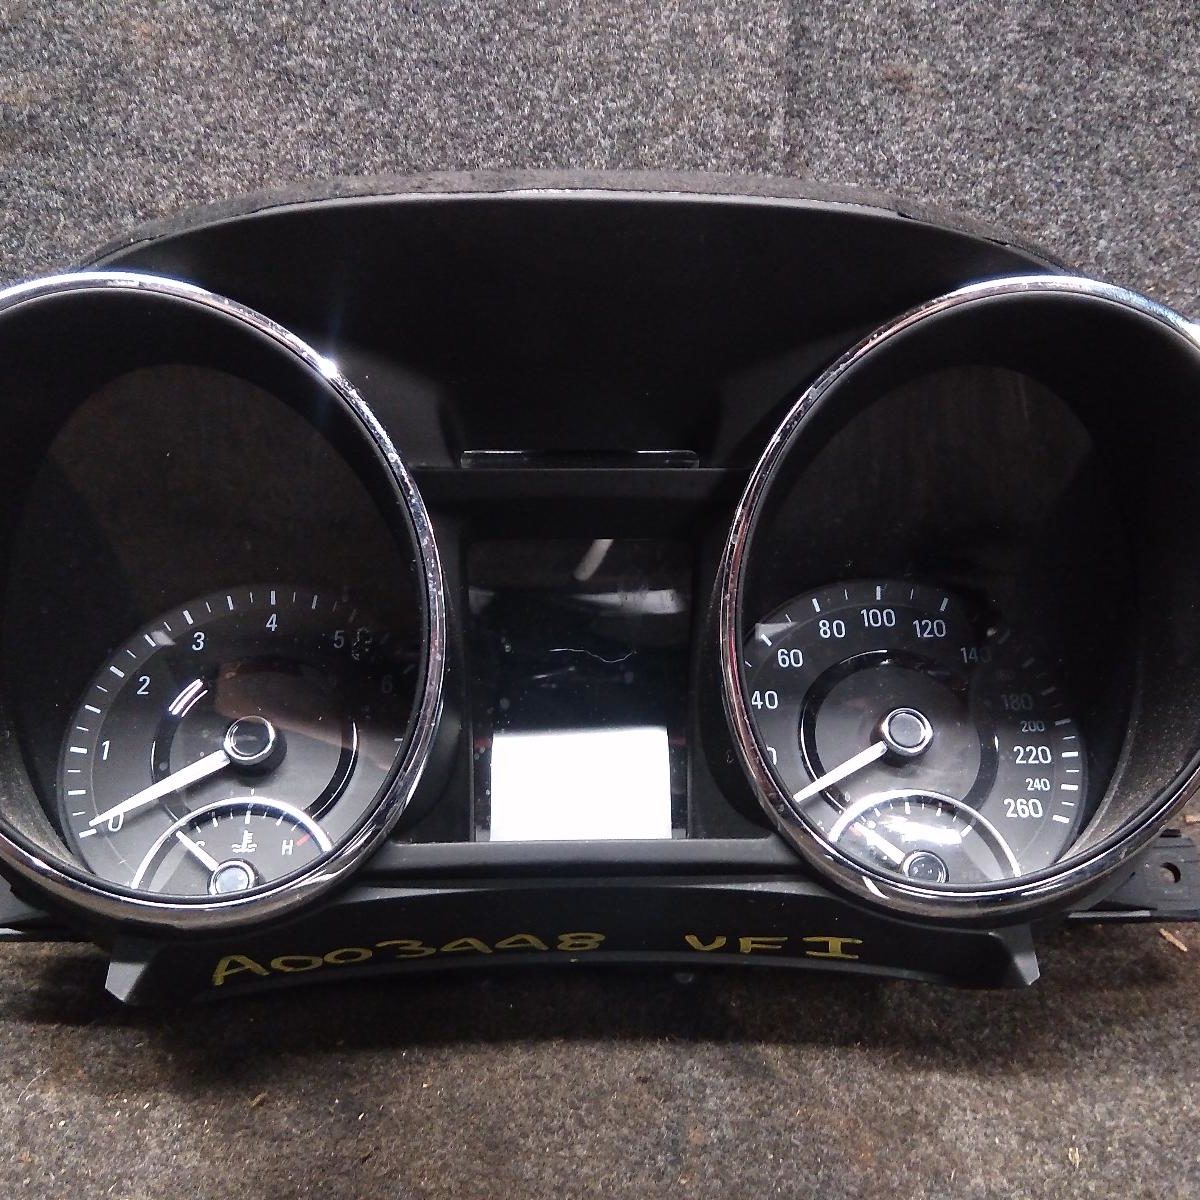 2013 HOLDEN COMMODORE INSTRUMENT CLUSTER